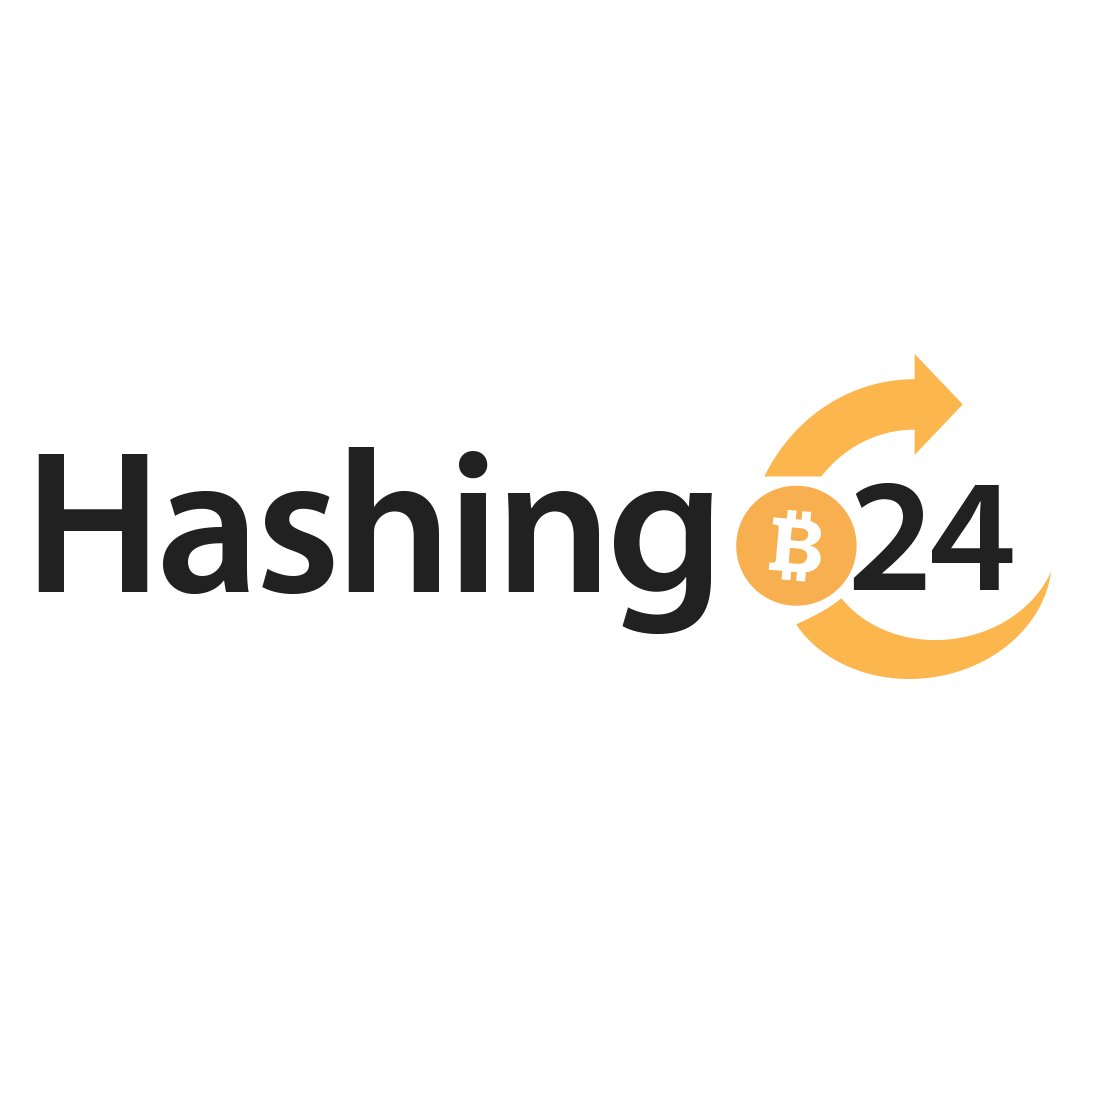 Hashing24  BTC 25TH/s 18Months Zero-Fee Cloud Mining Contract with Profitability Calculation Estimate